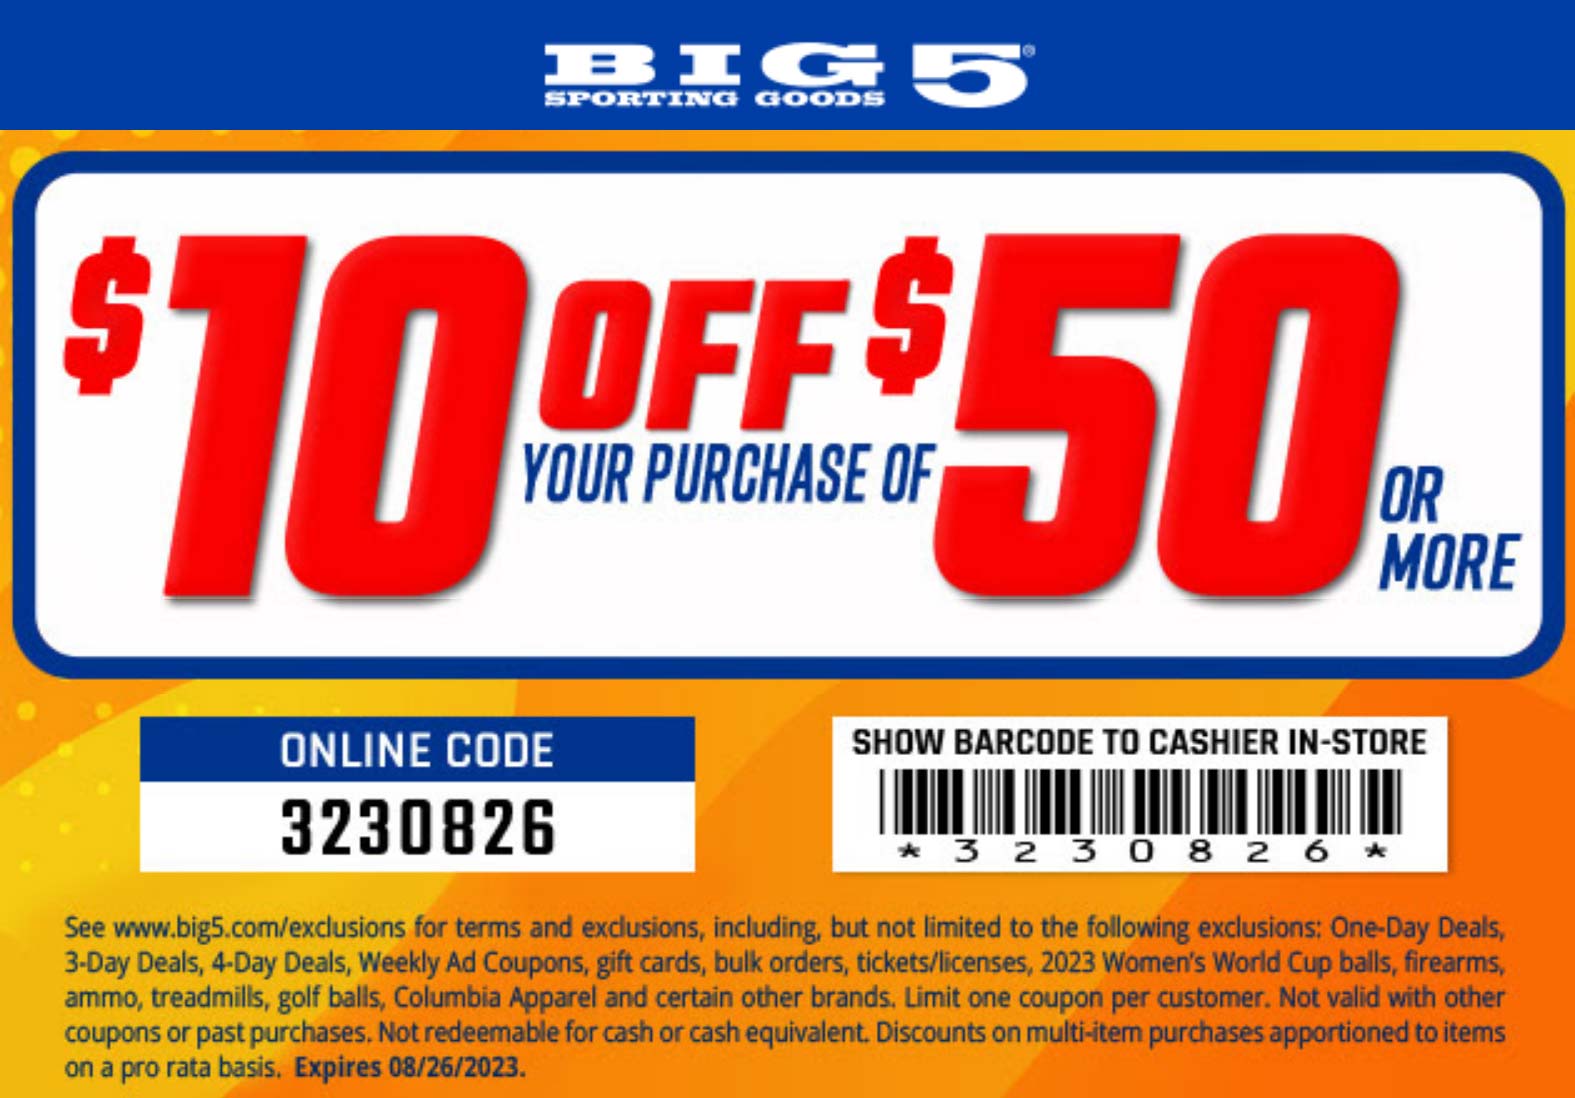 Big 5 stores Coupon  $10 off $50 today at Big 5 sporting goods, or online via promo code 3230826 #big5 